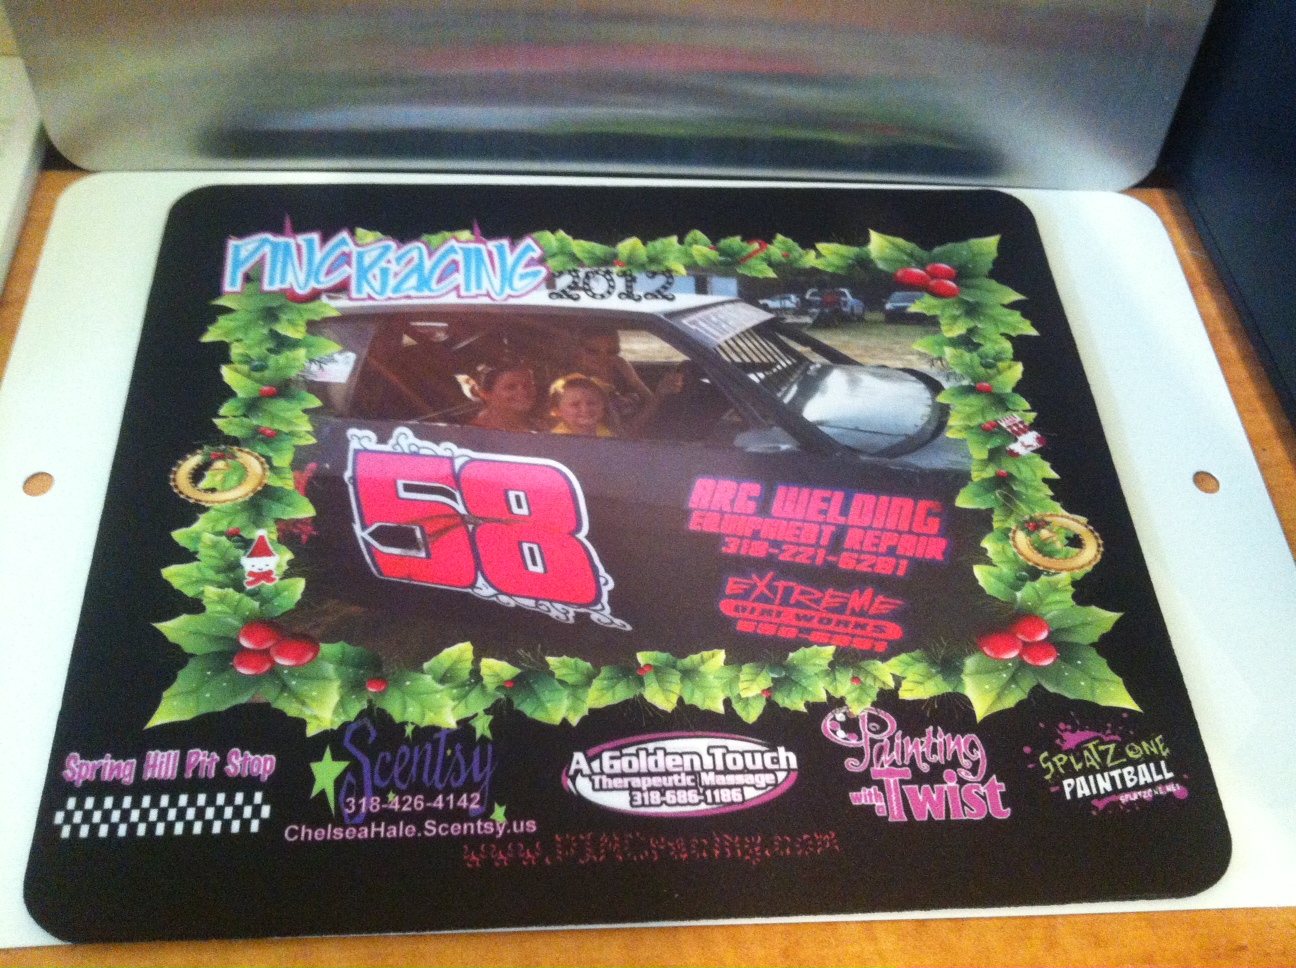 PINC Racing ST Jude fundraiser made with sublimation printing